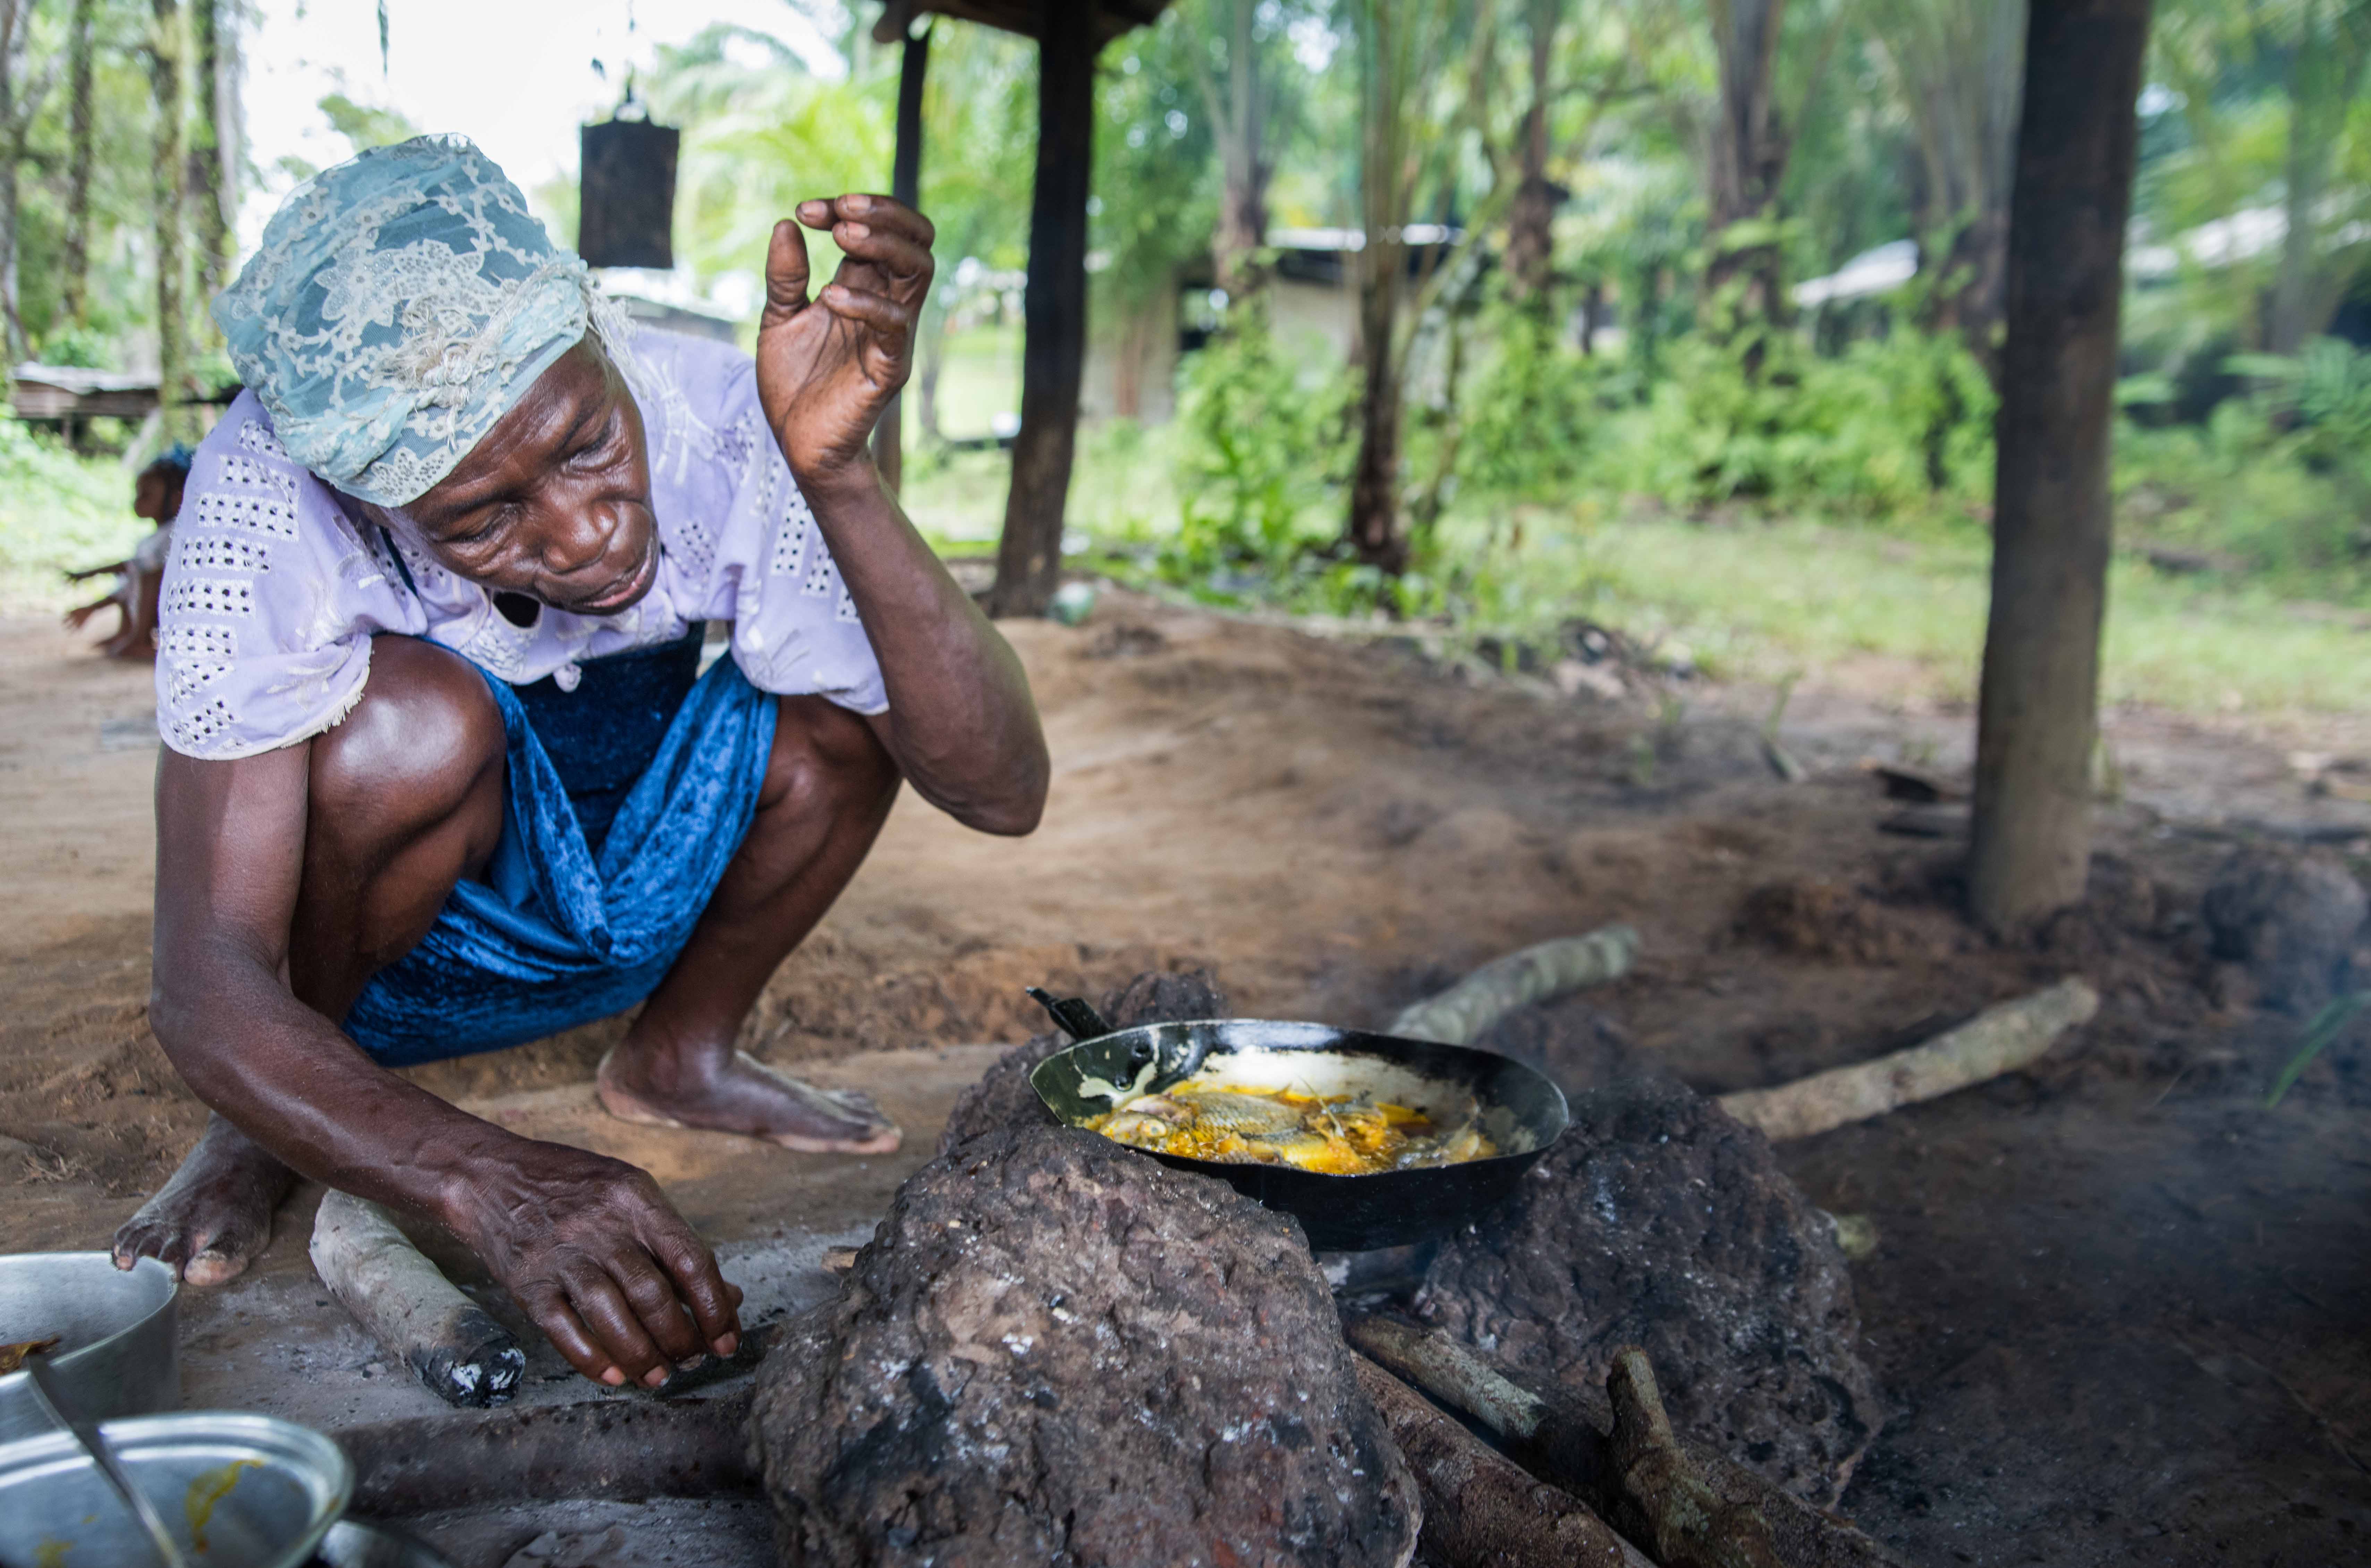 Woman crouches next to cooking fish